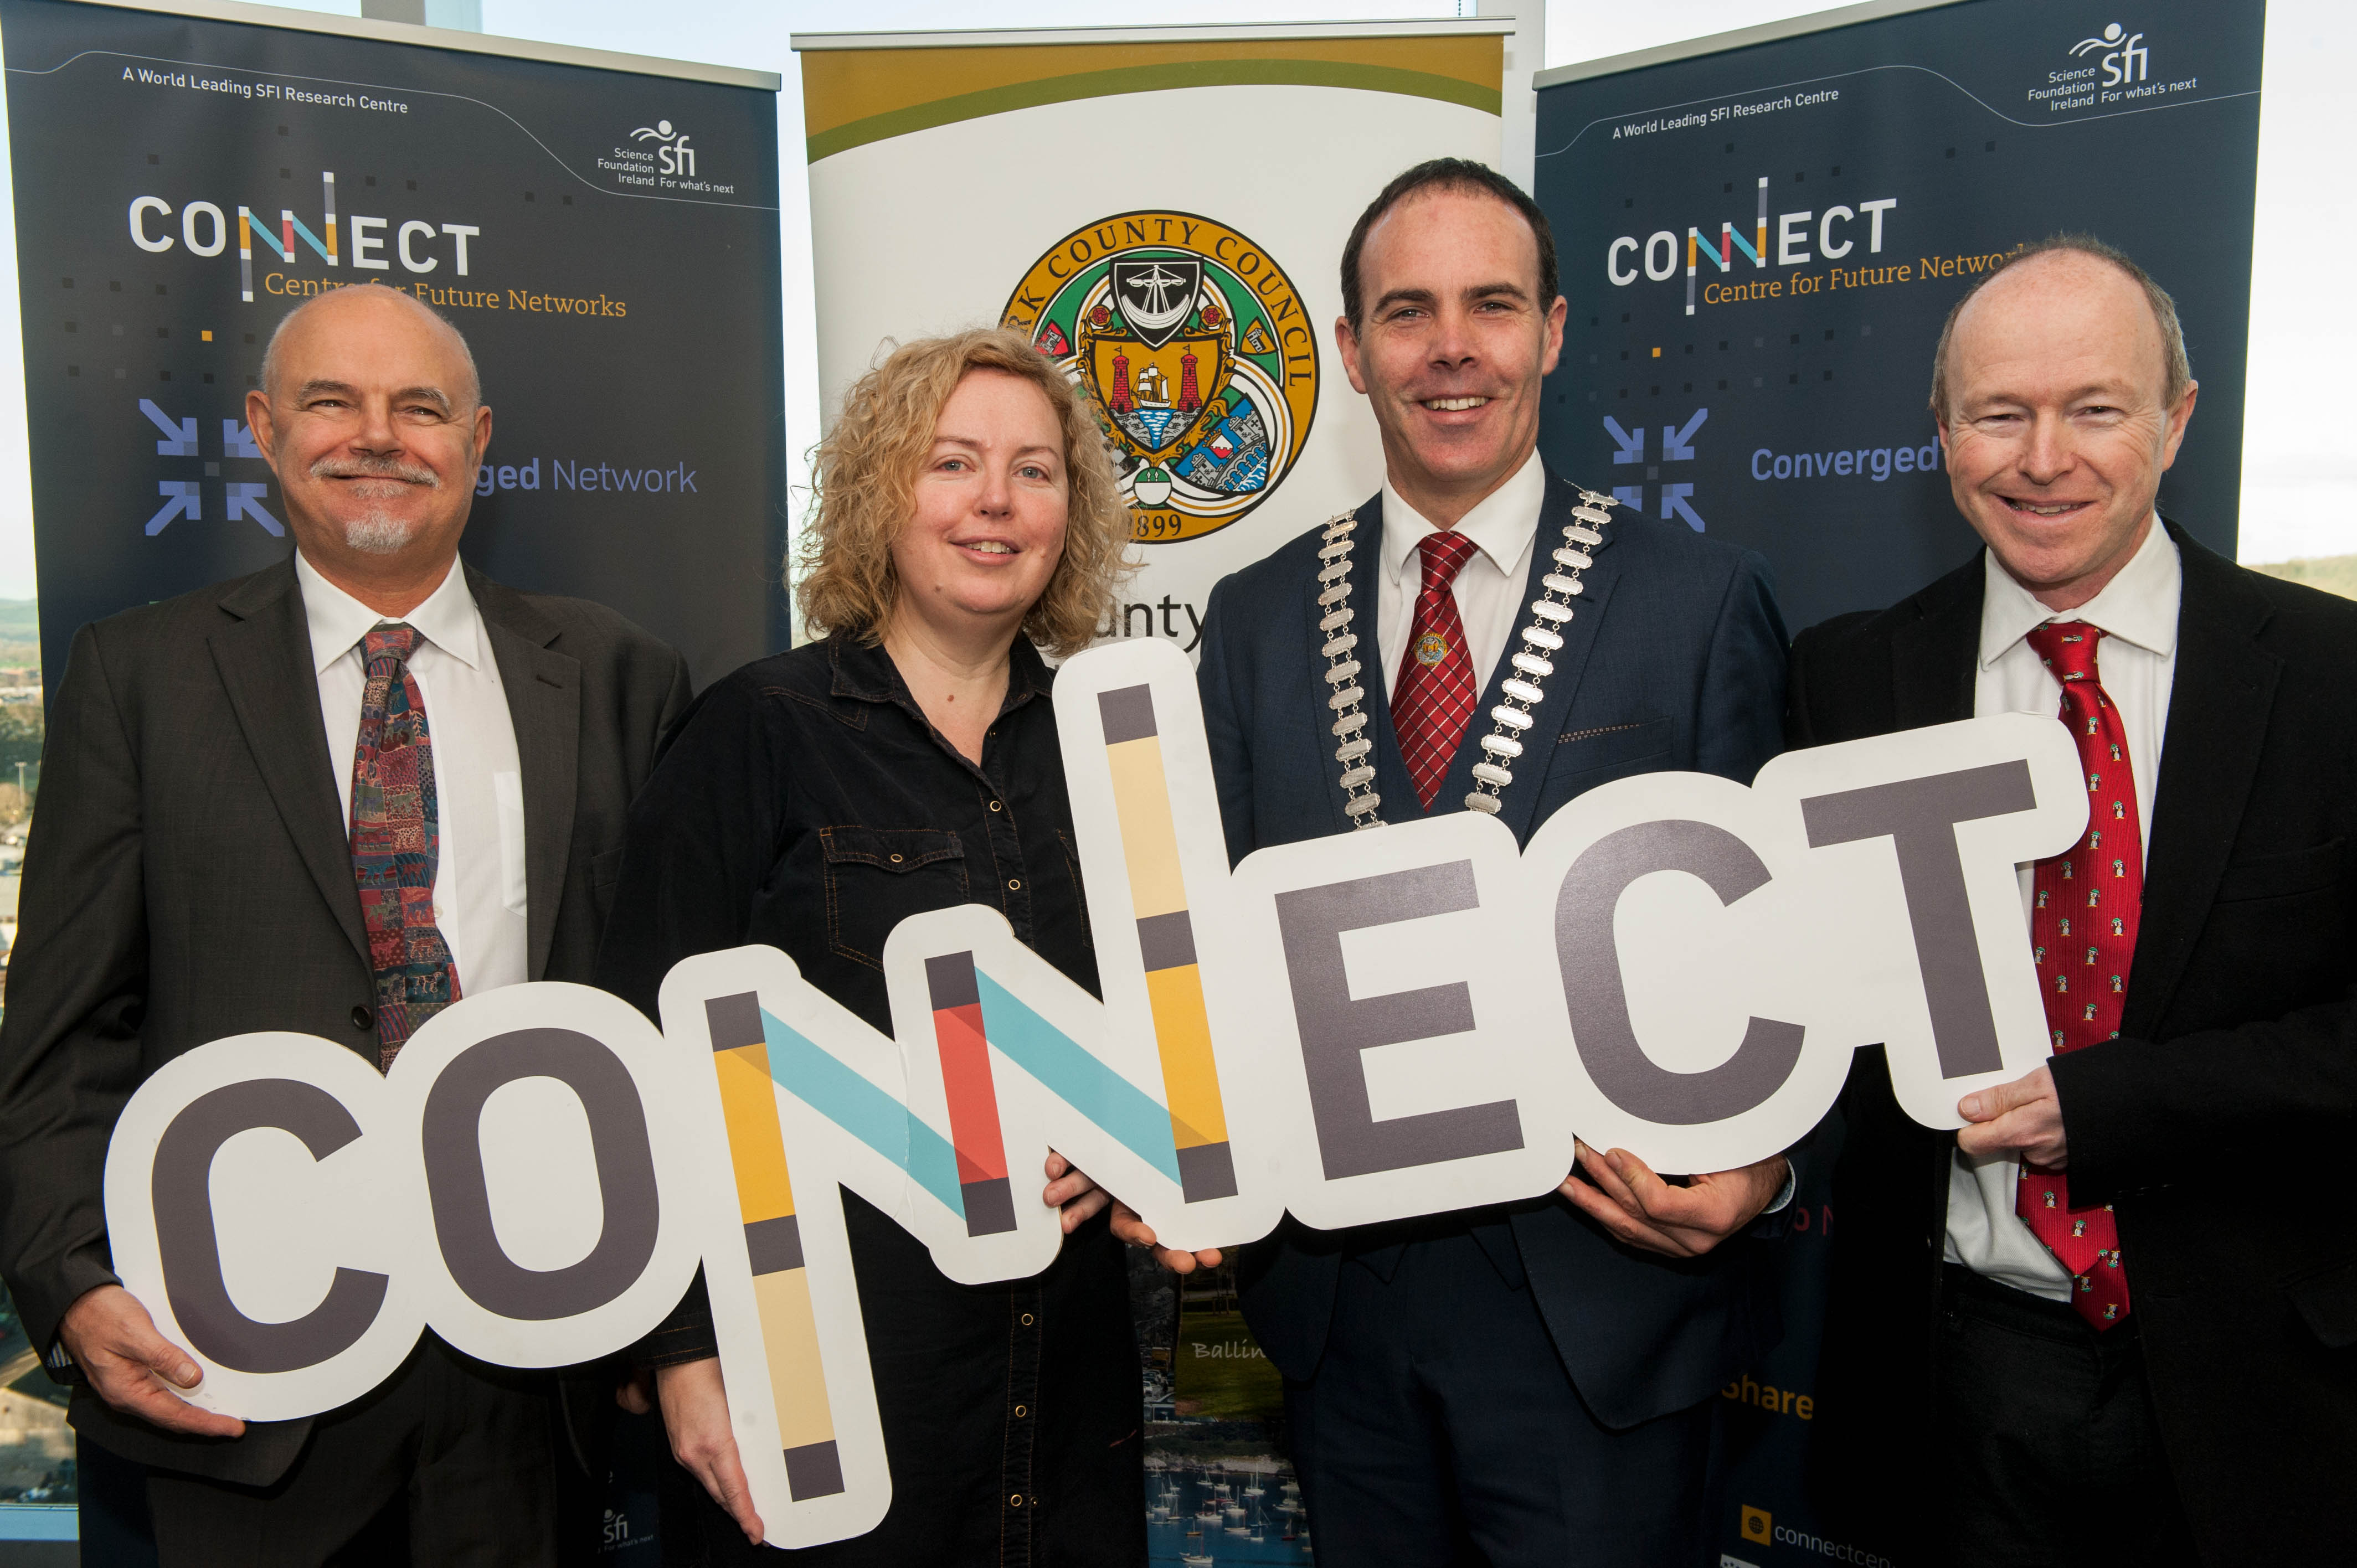 CONNECT in Cork